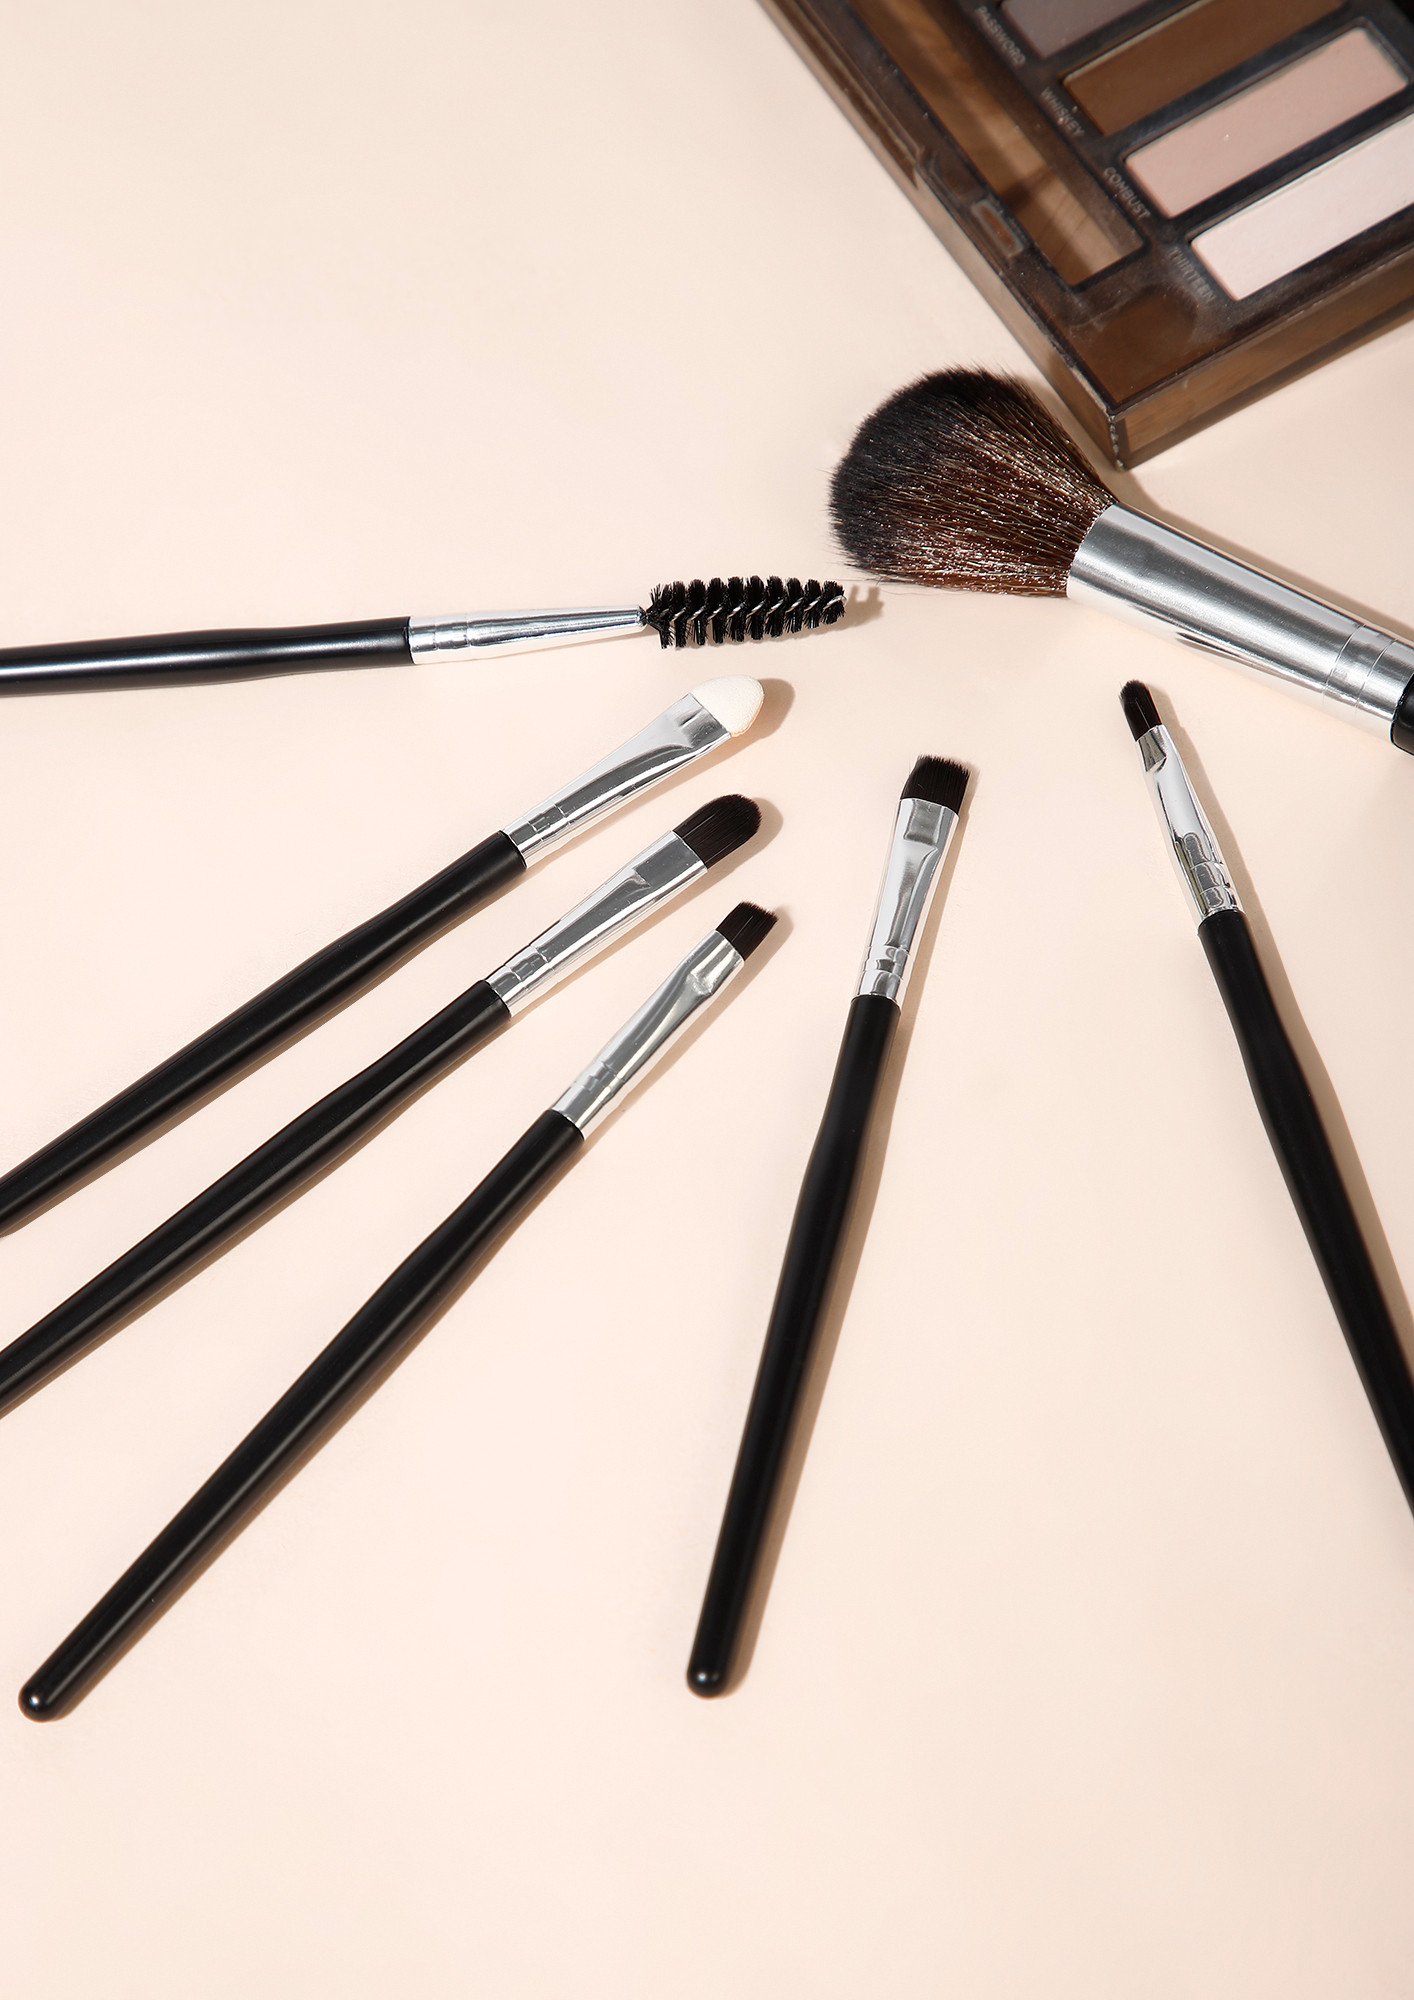 FRESH FACE COFFEE BROWN MAKEUP BRUSHES - SET OF 7